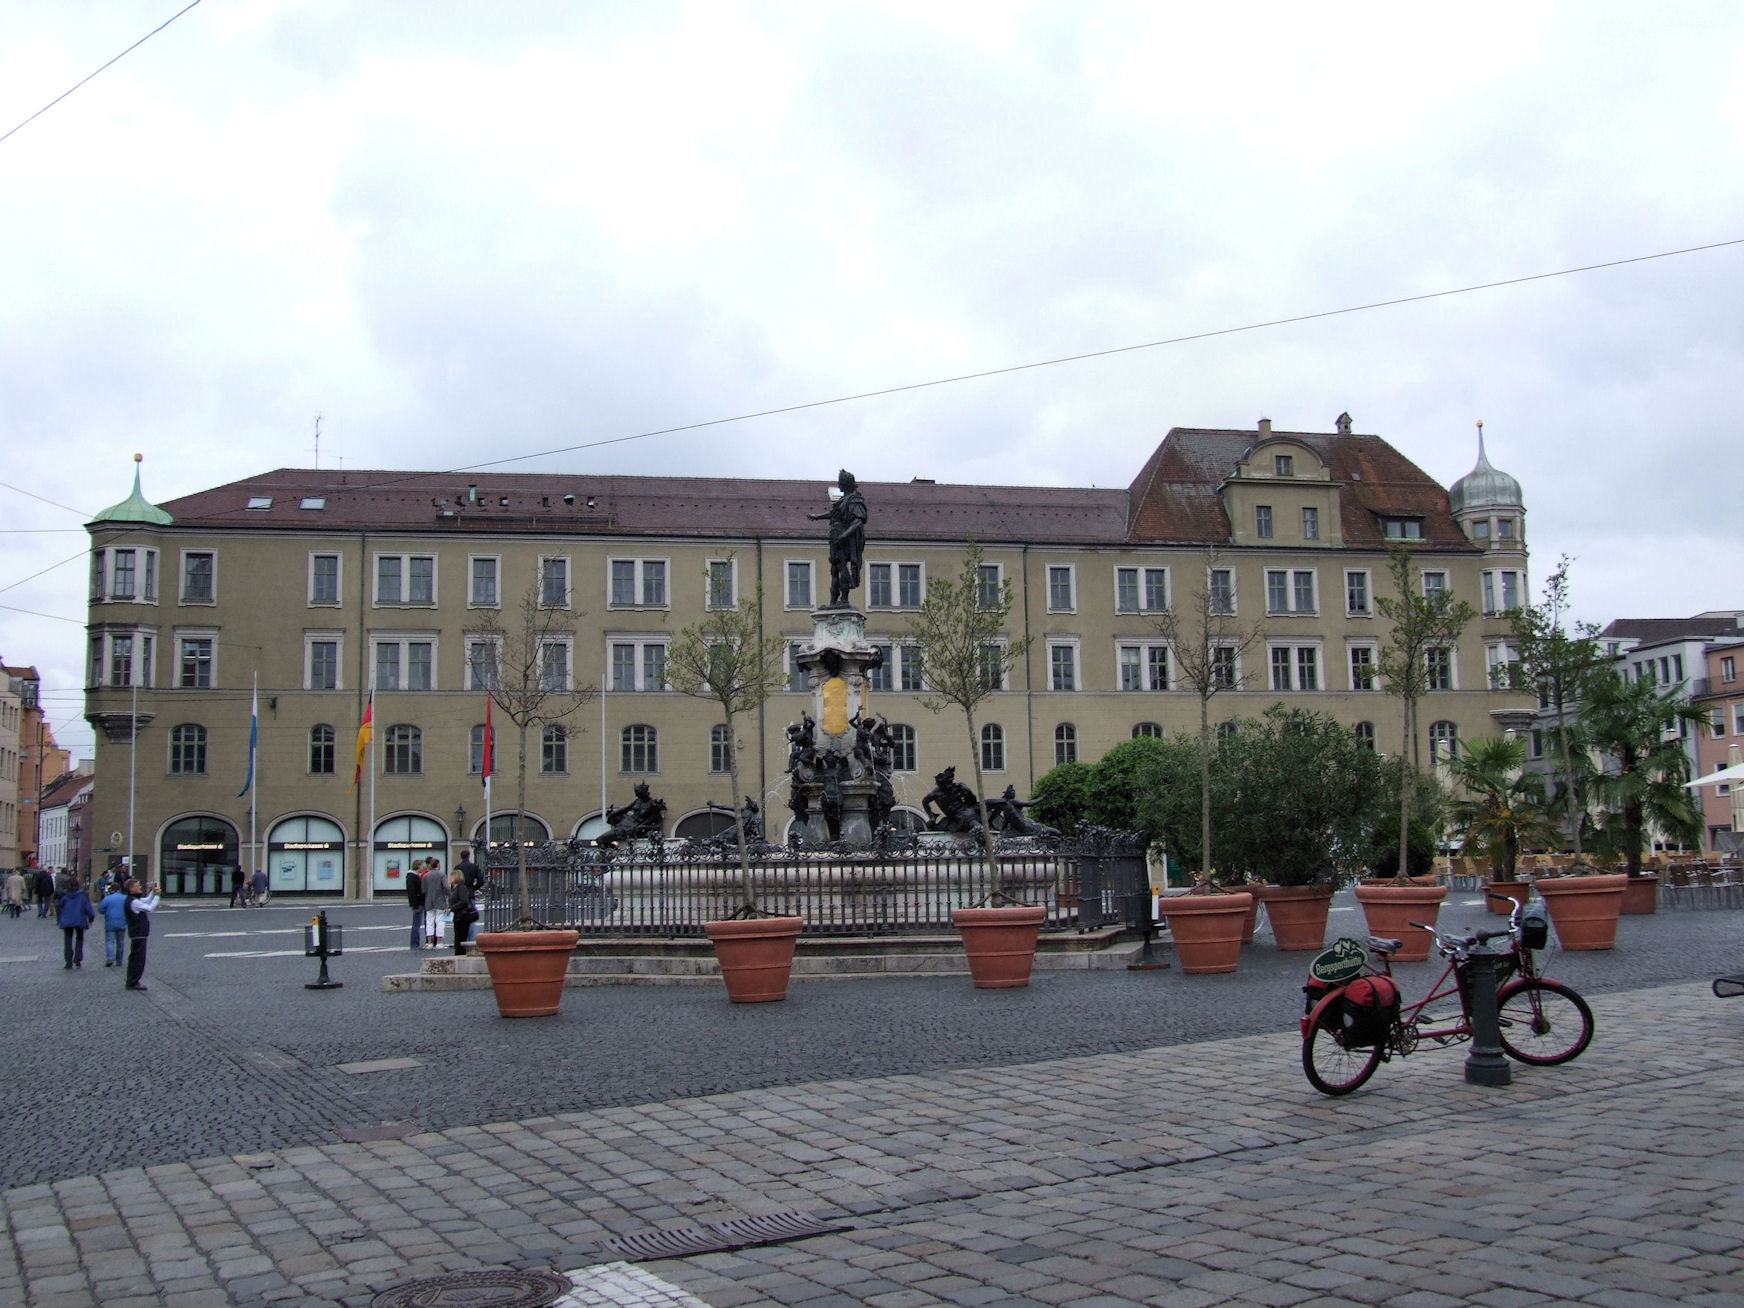 two people on bikes are by a fountain with an elephant statue